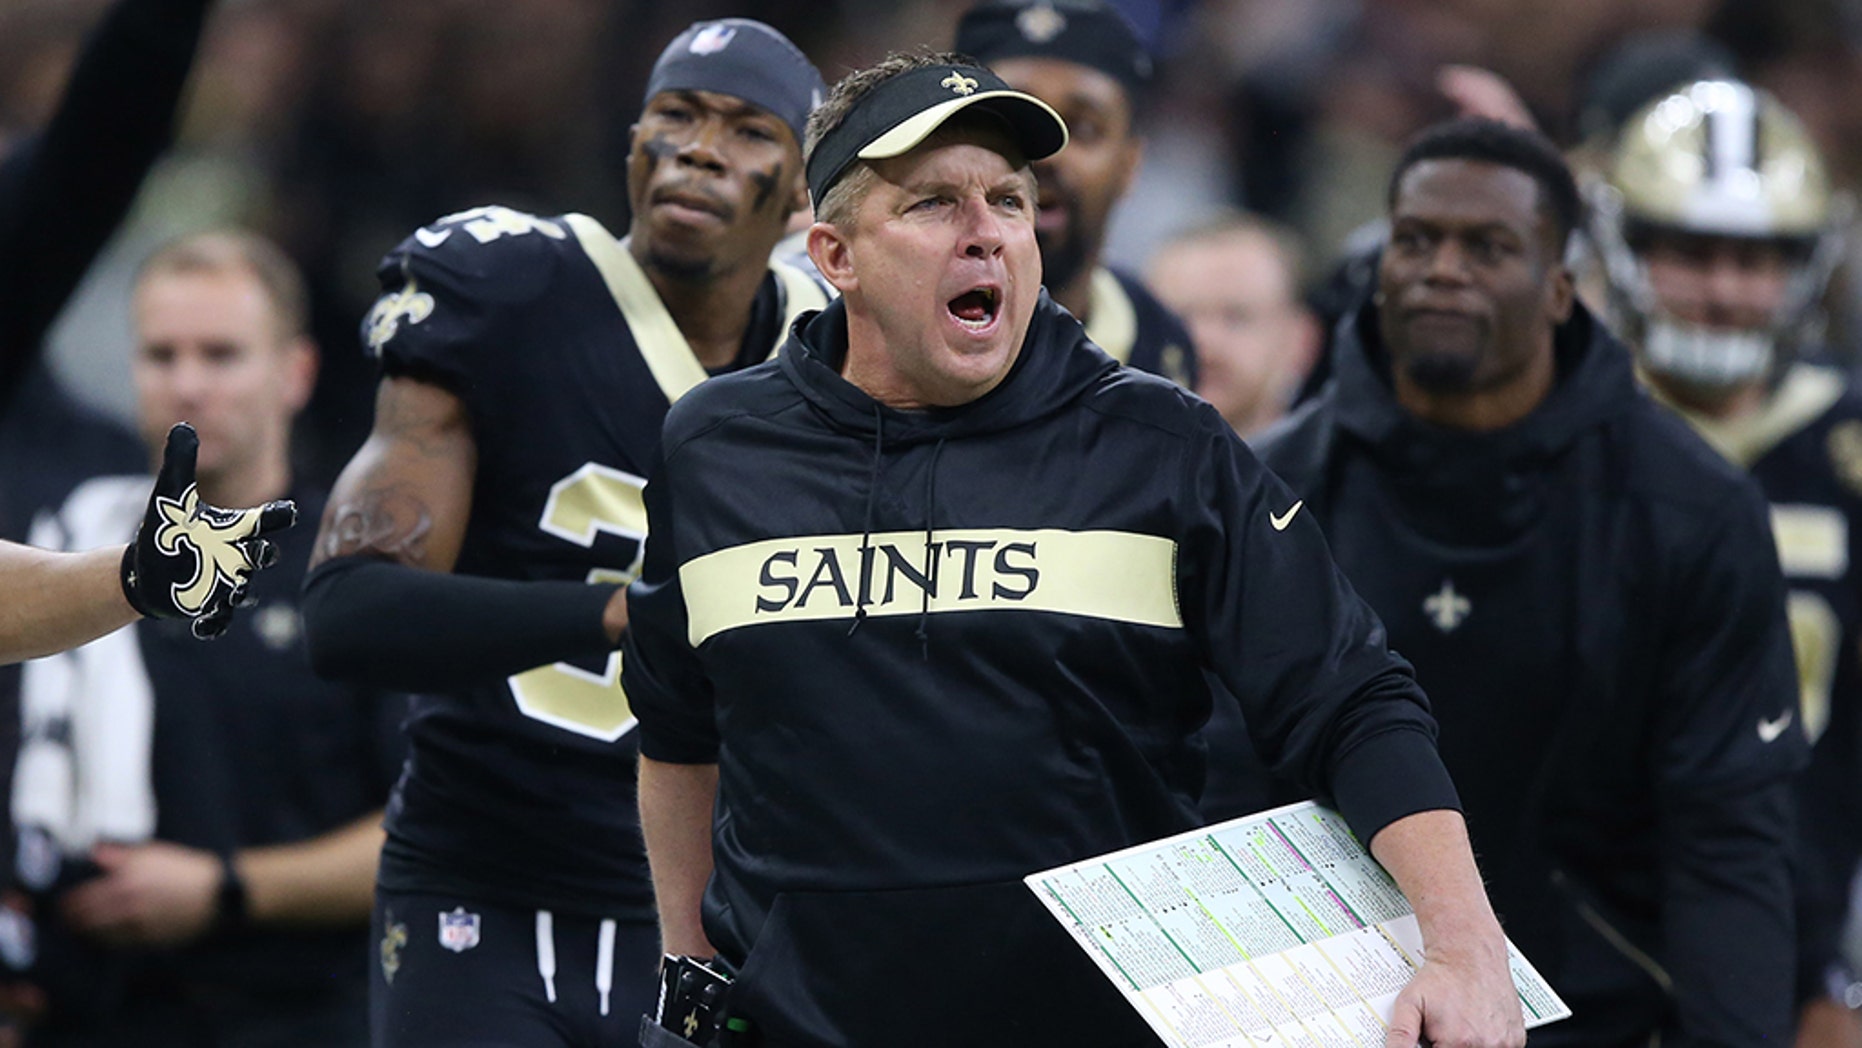 New Orleans Saints coach takes apparent dig at Goodell with T-shirt